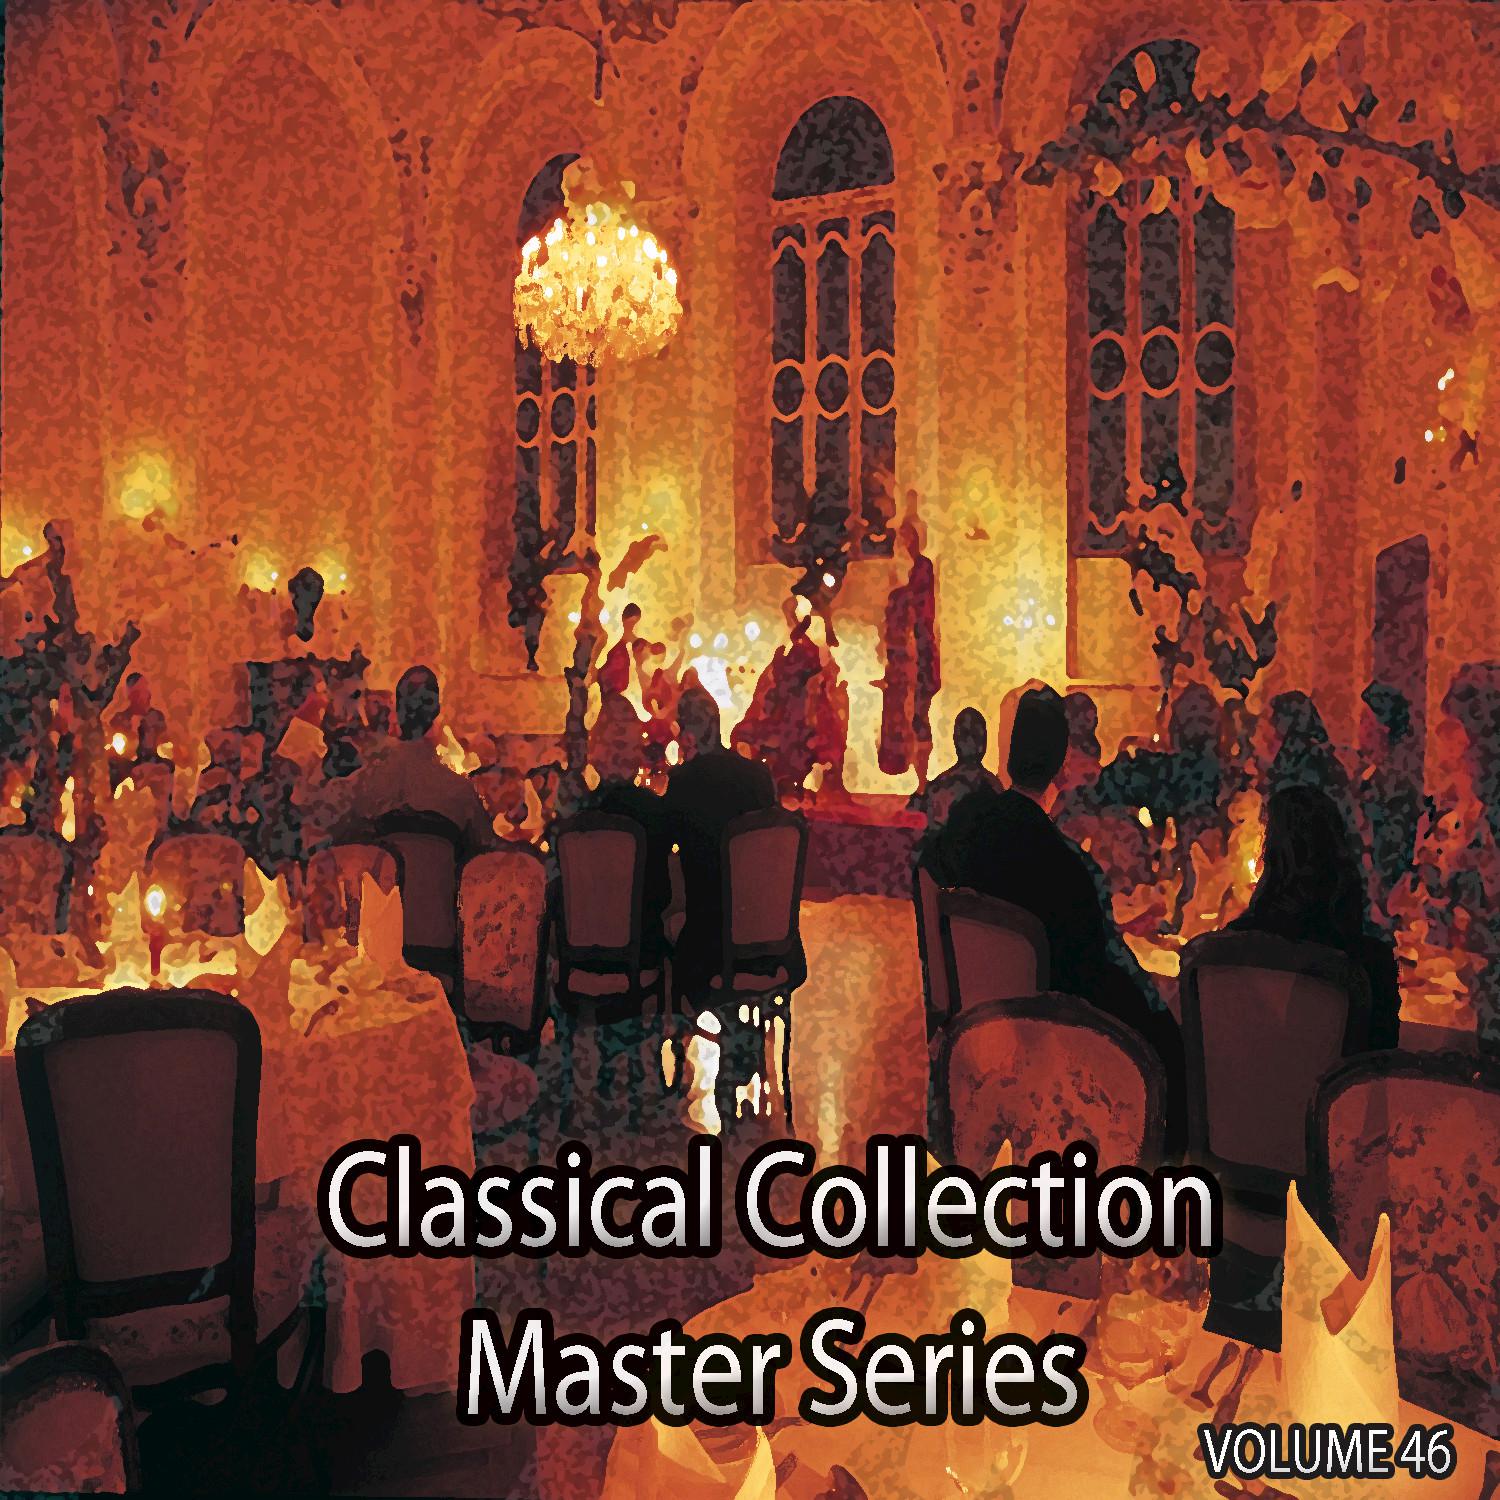 Symphony for Cello and Orchestra, Op. 68: I. Allegro mastoso, Pt. 2